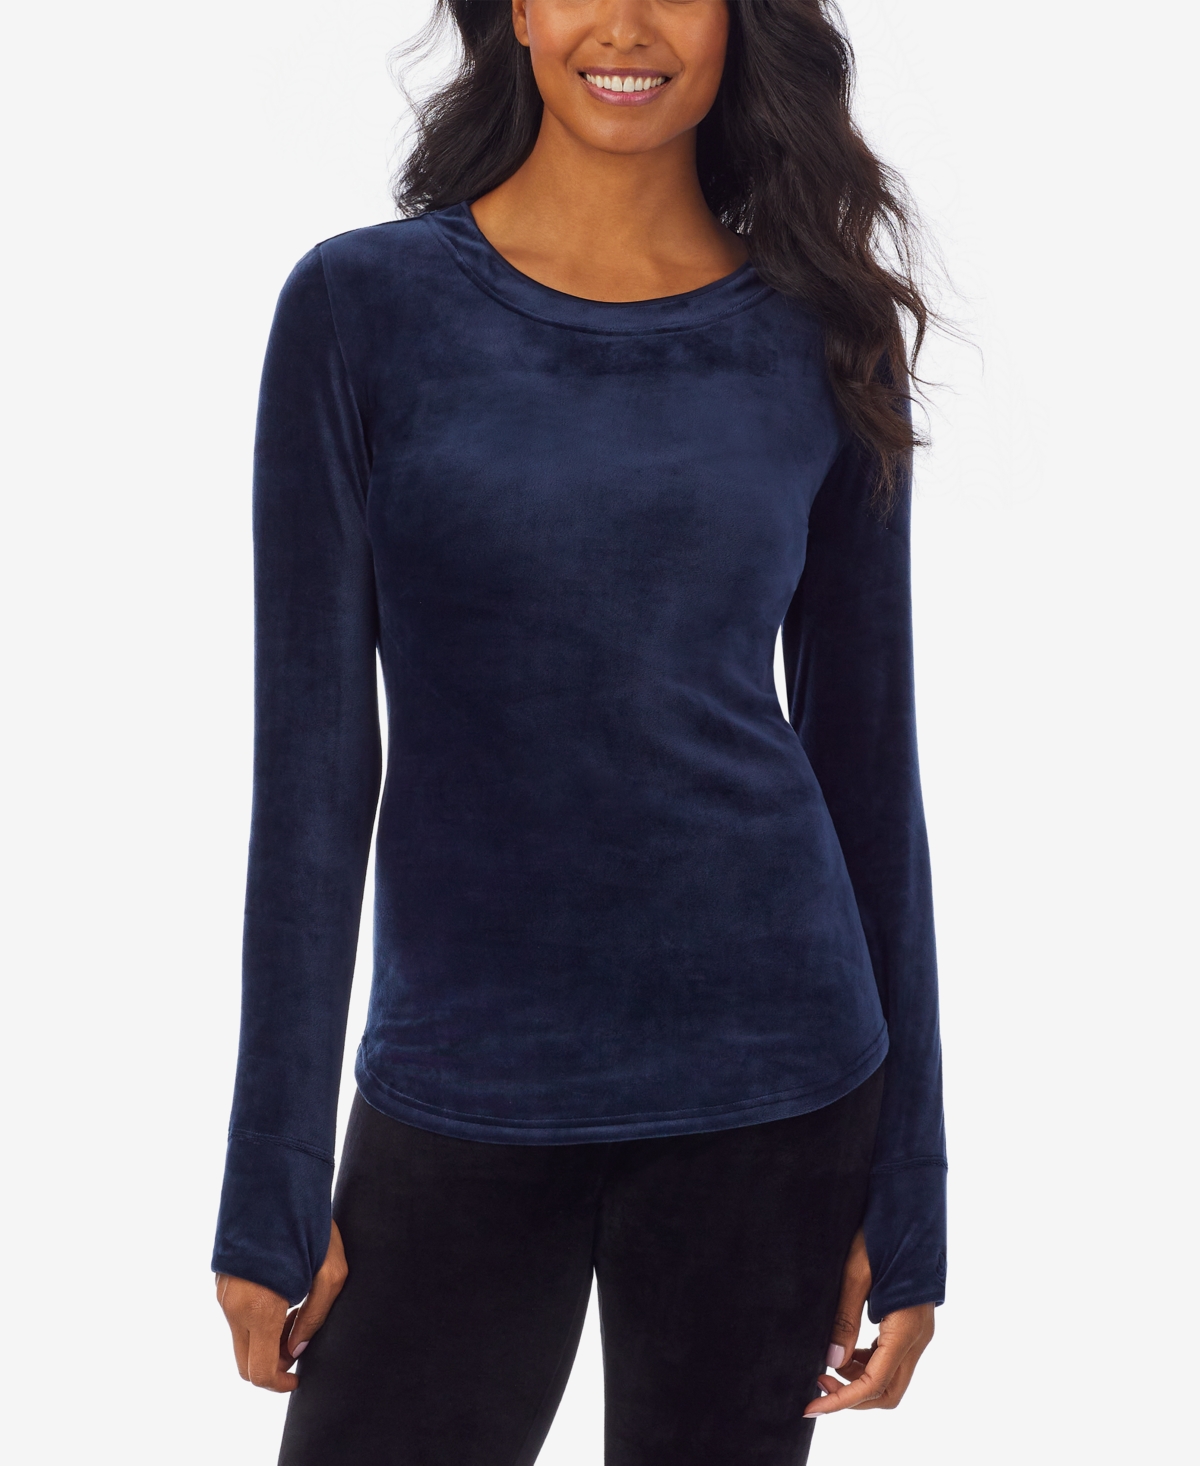 Cuddl Duds Women's Double Plush Stretch Velour Top